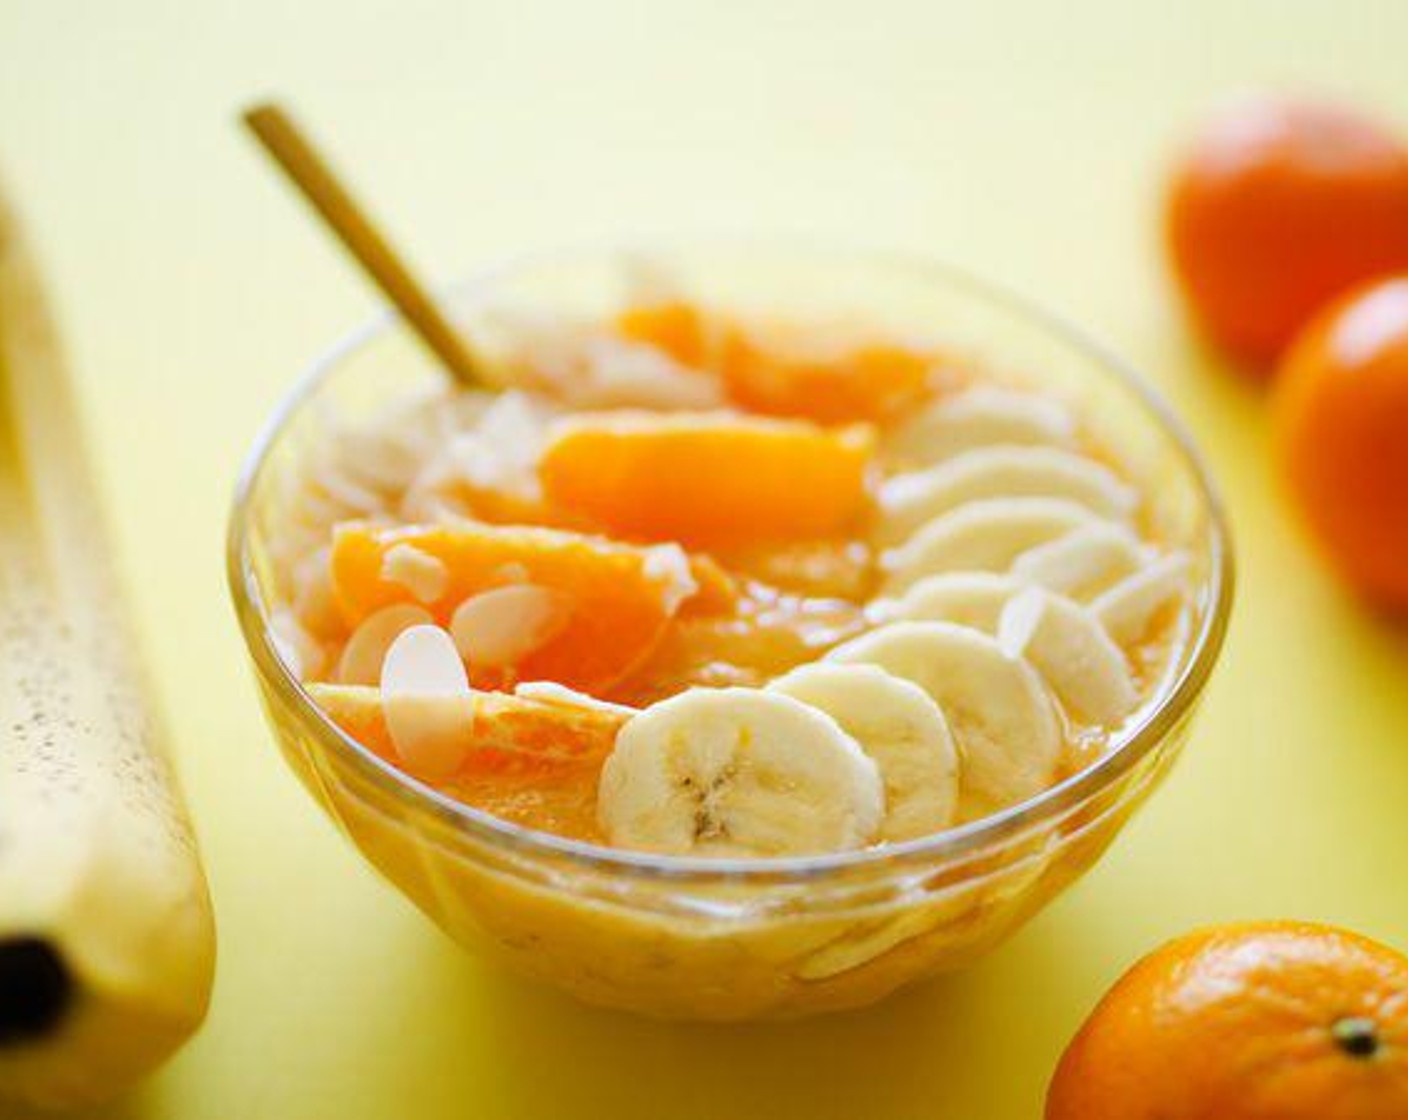 step 2 Pour smoothie into a serving bowl and top with segmented mandarin oranges, sliced banana, and shaved almonds.